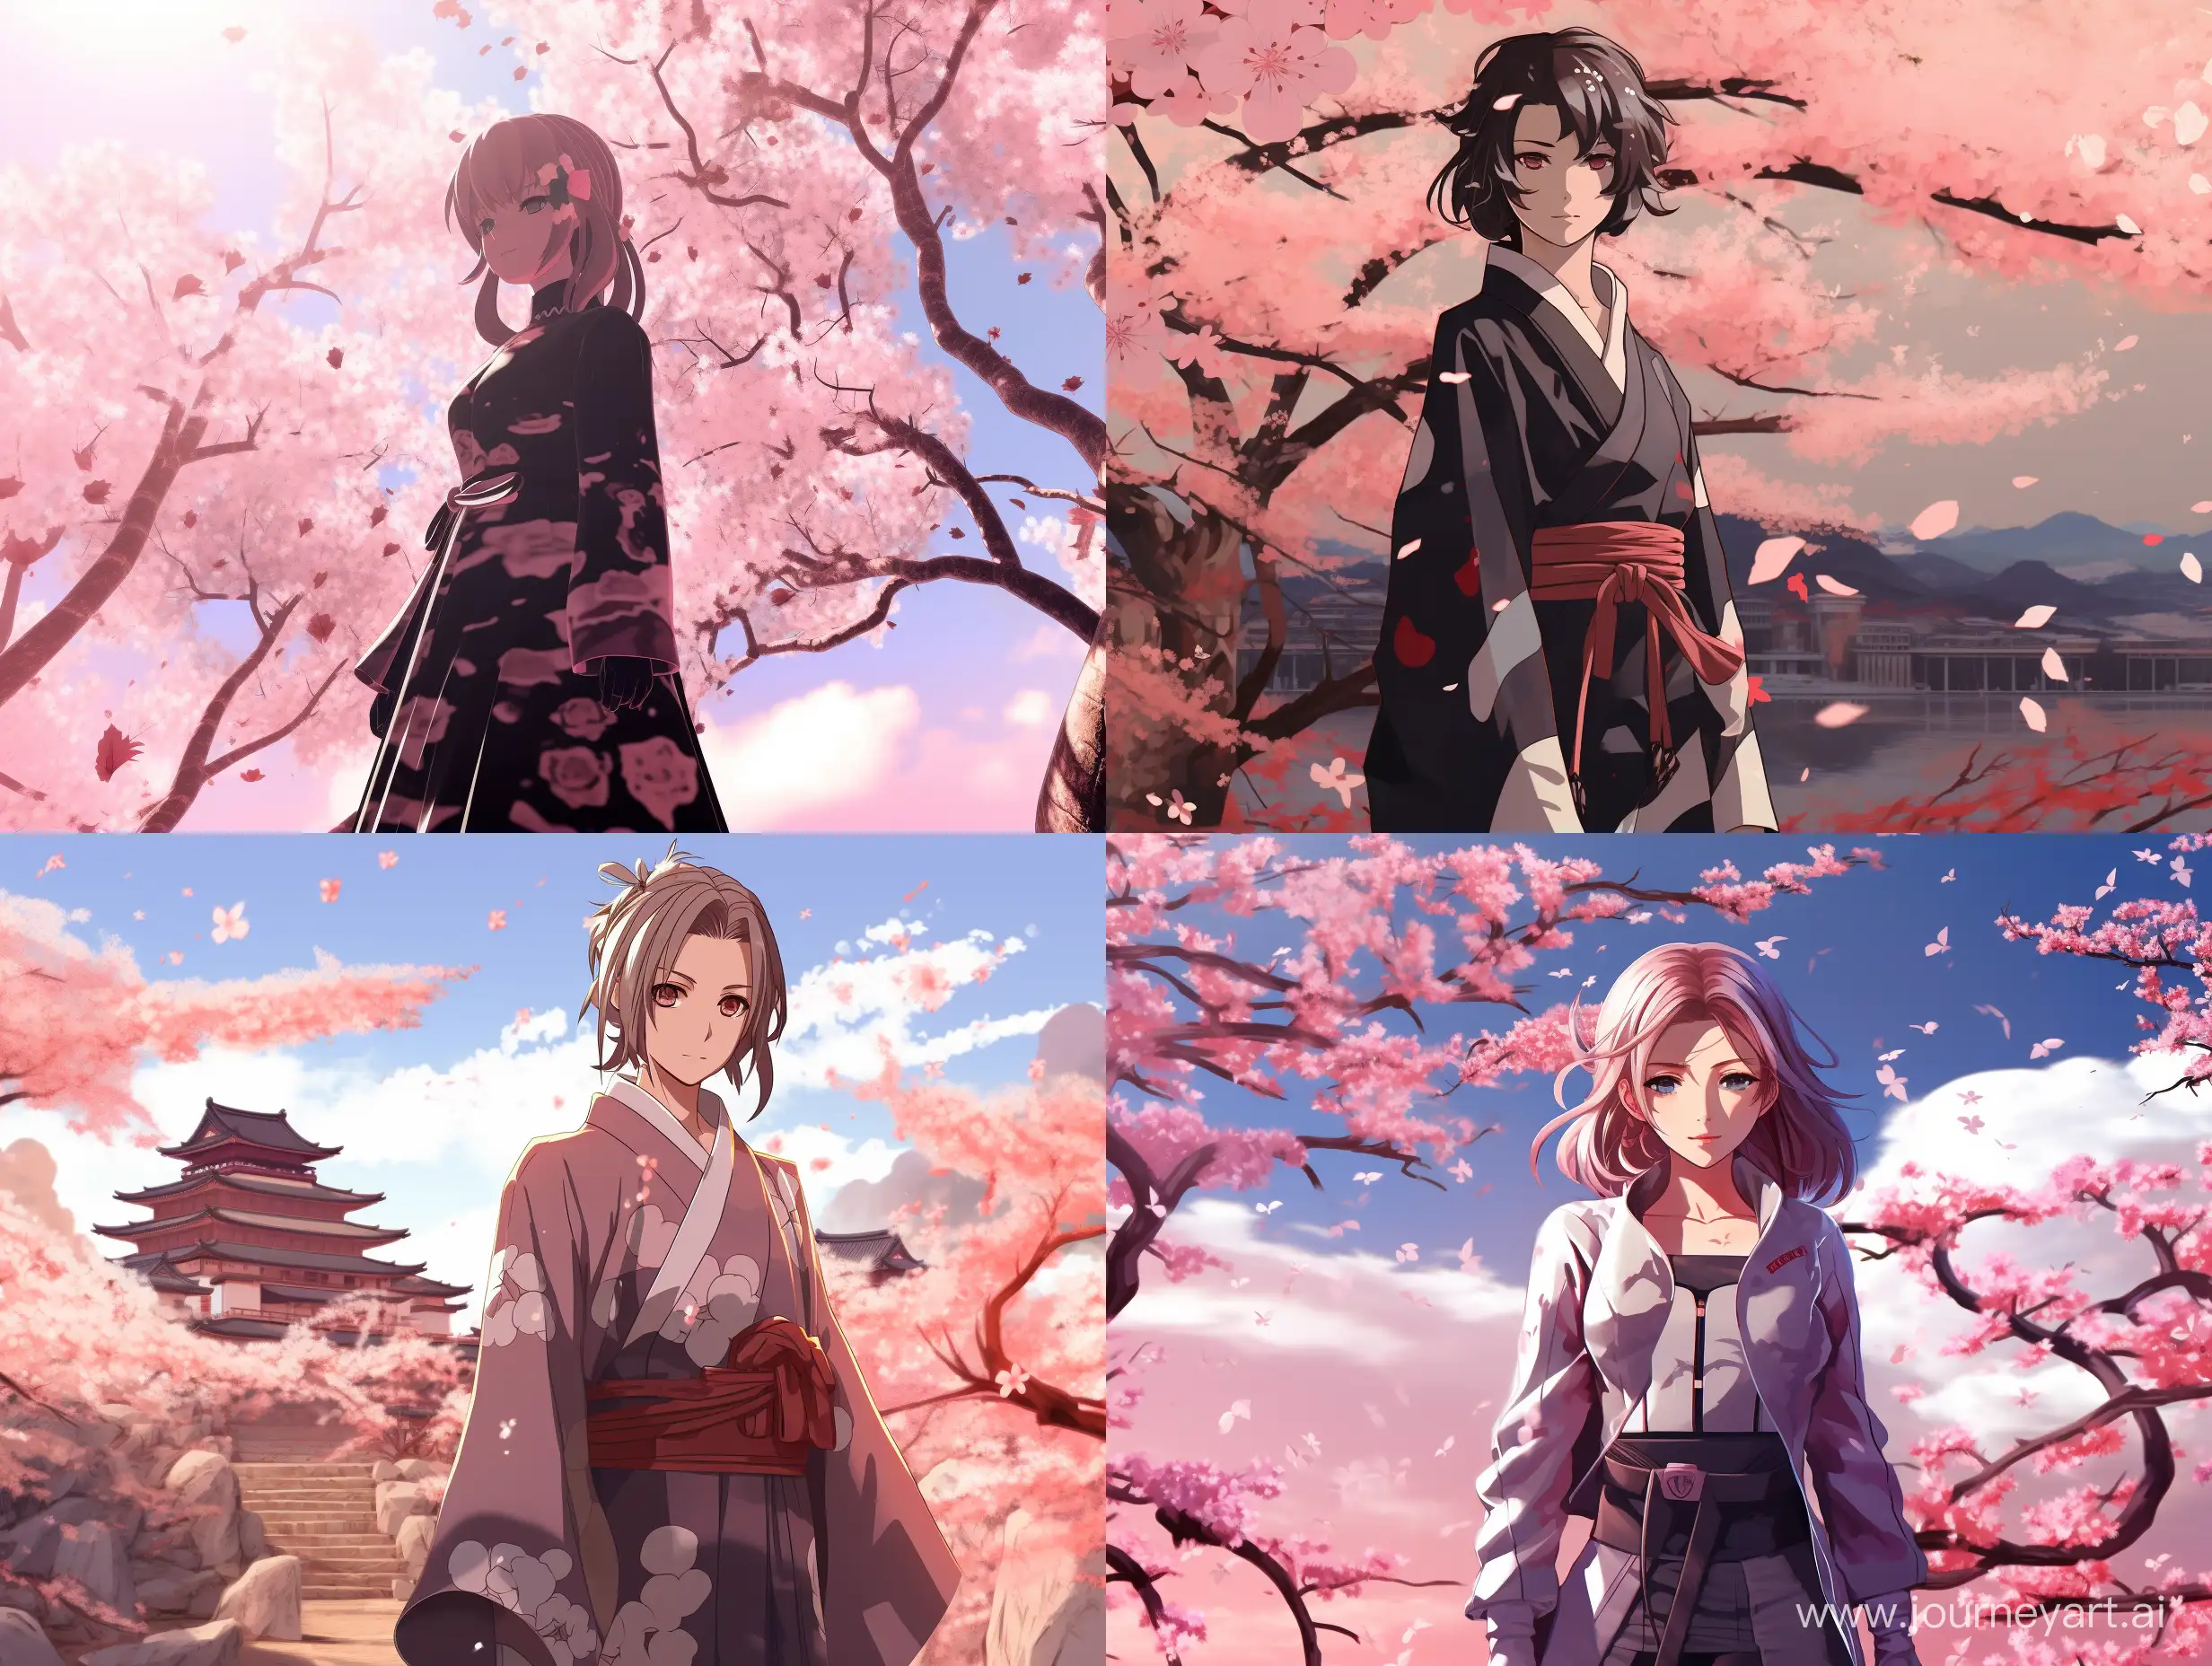 Mysterious-Anime-Character-Amidst-Sakura-Blossoms